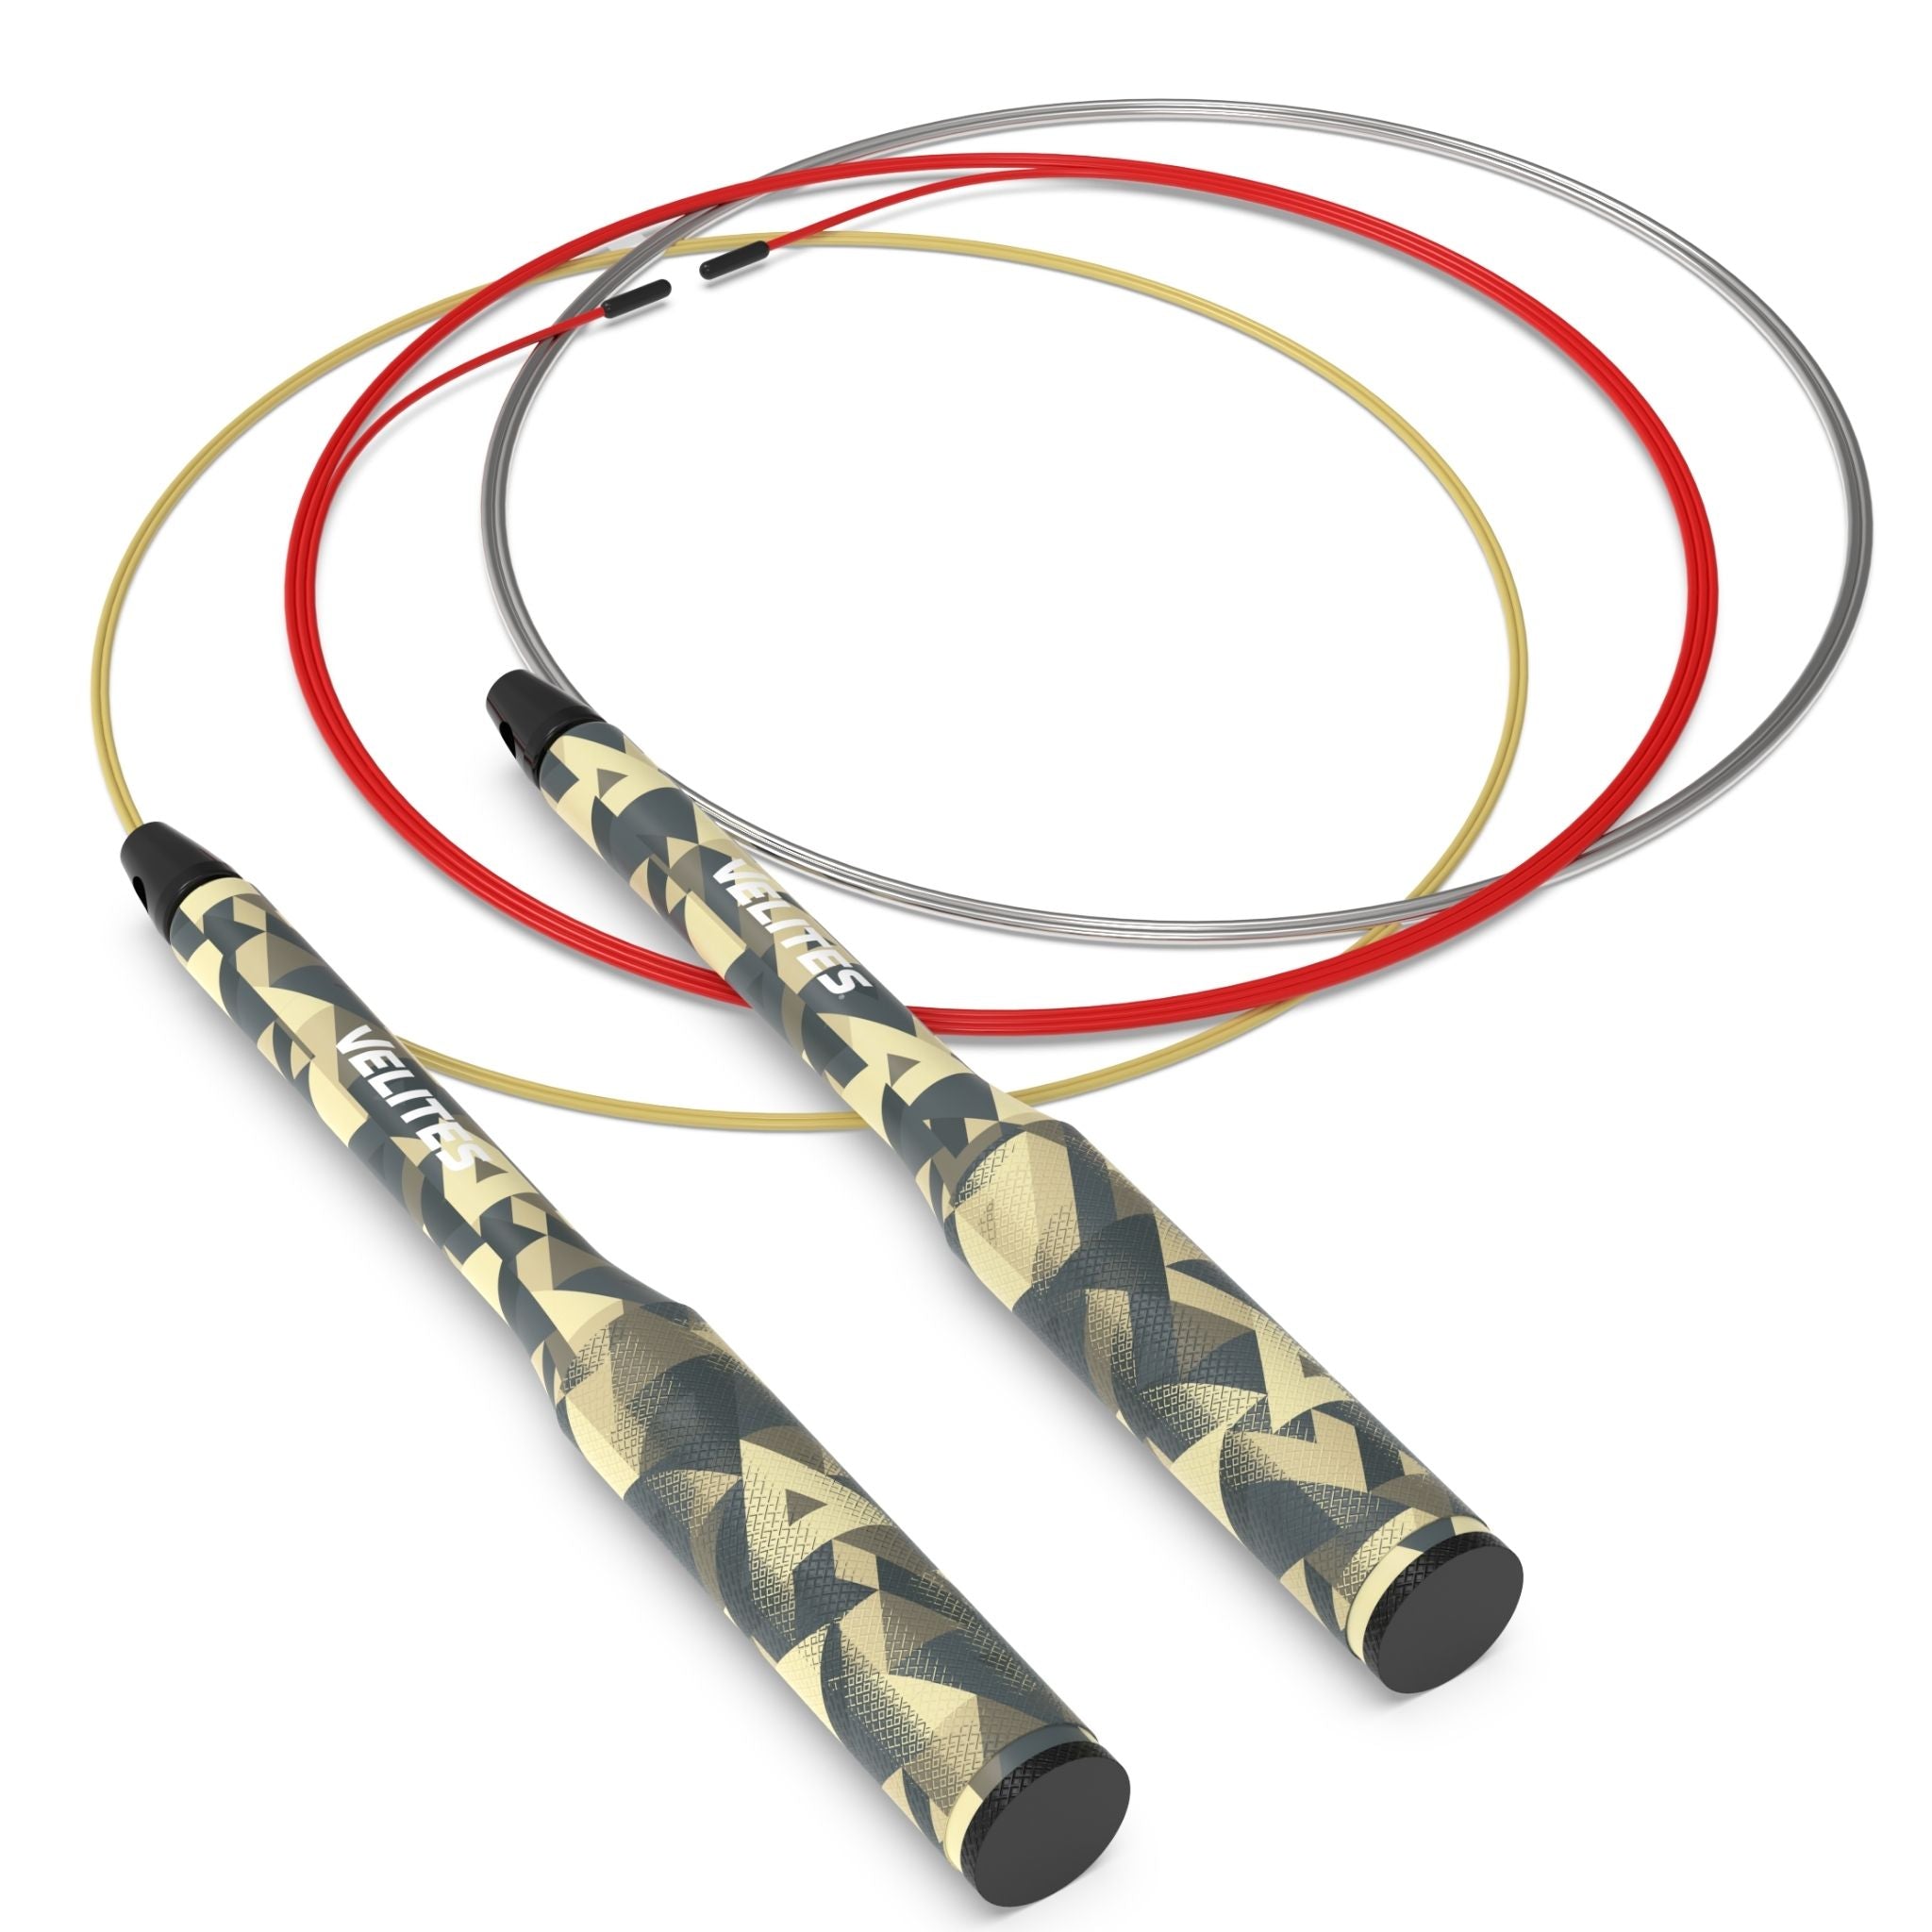 Pack Comba Fire 2.0 Velites + Cables - camuflaje - 